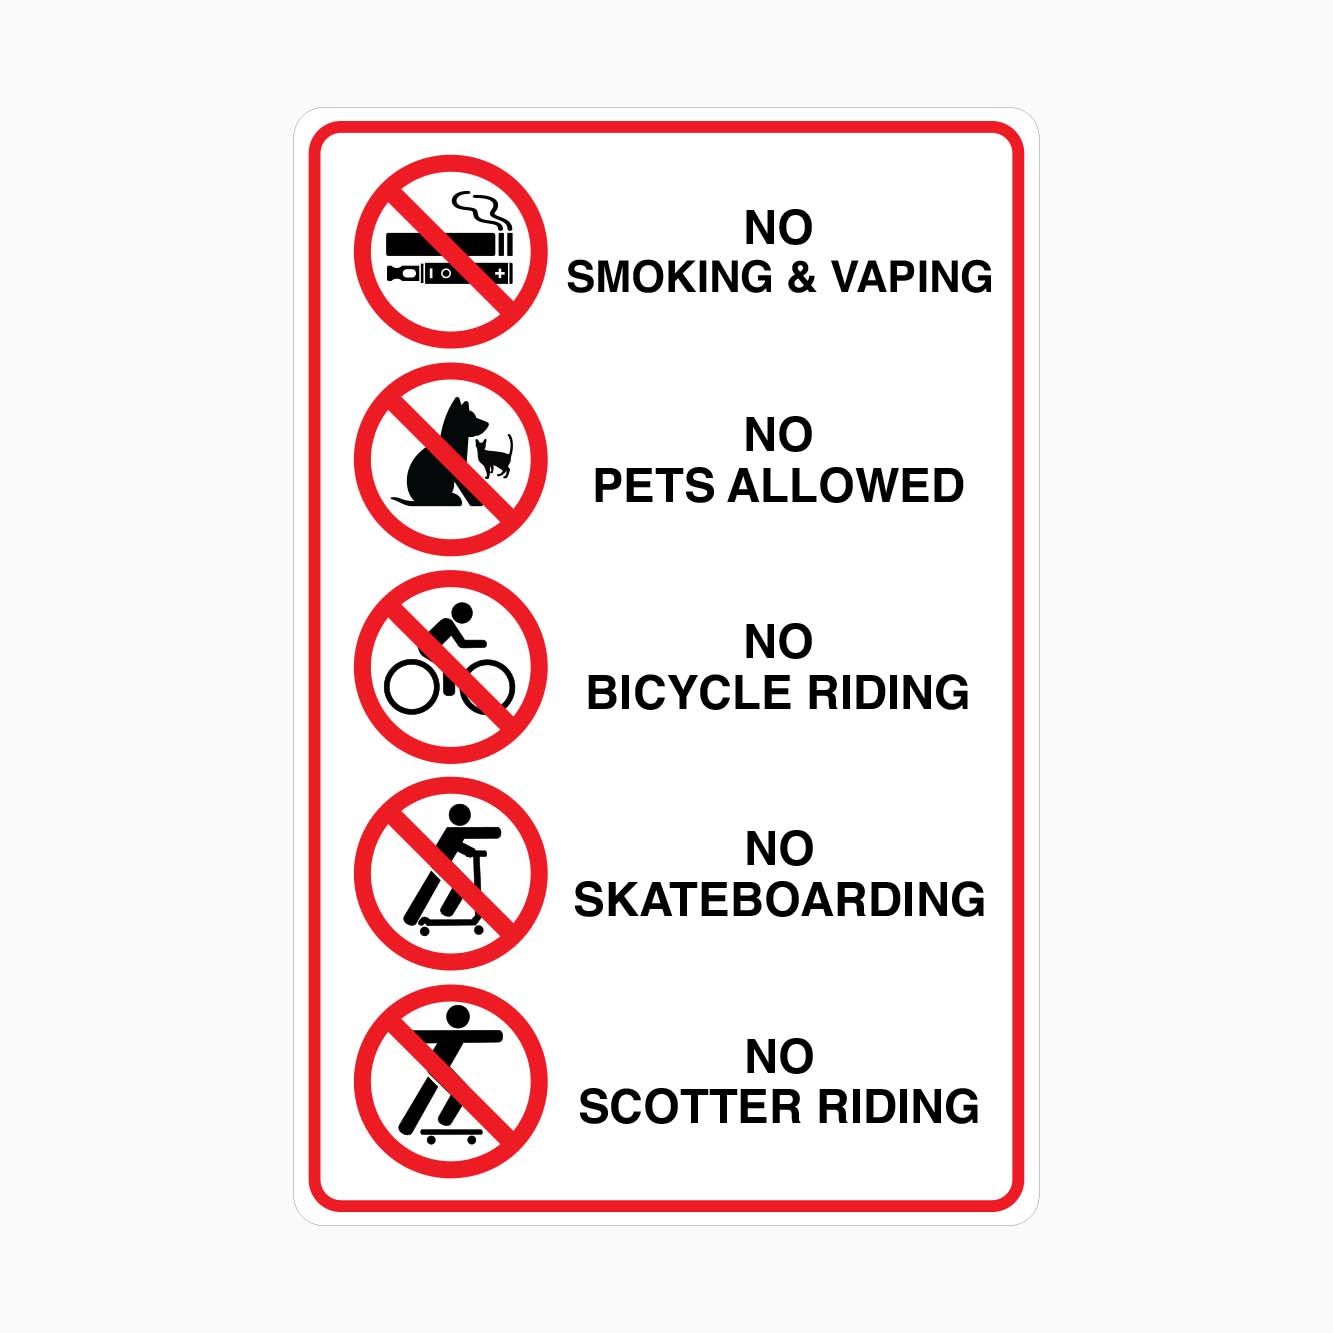 NO SMOKING and VAPING, PETS ALLOWED, BICYCLE RIDING, SKATEBOARDING, SCOTTER RIDING SIGN - GET SIGNS